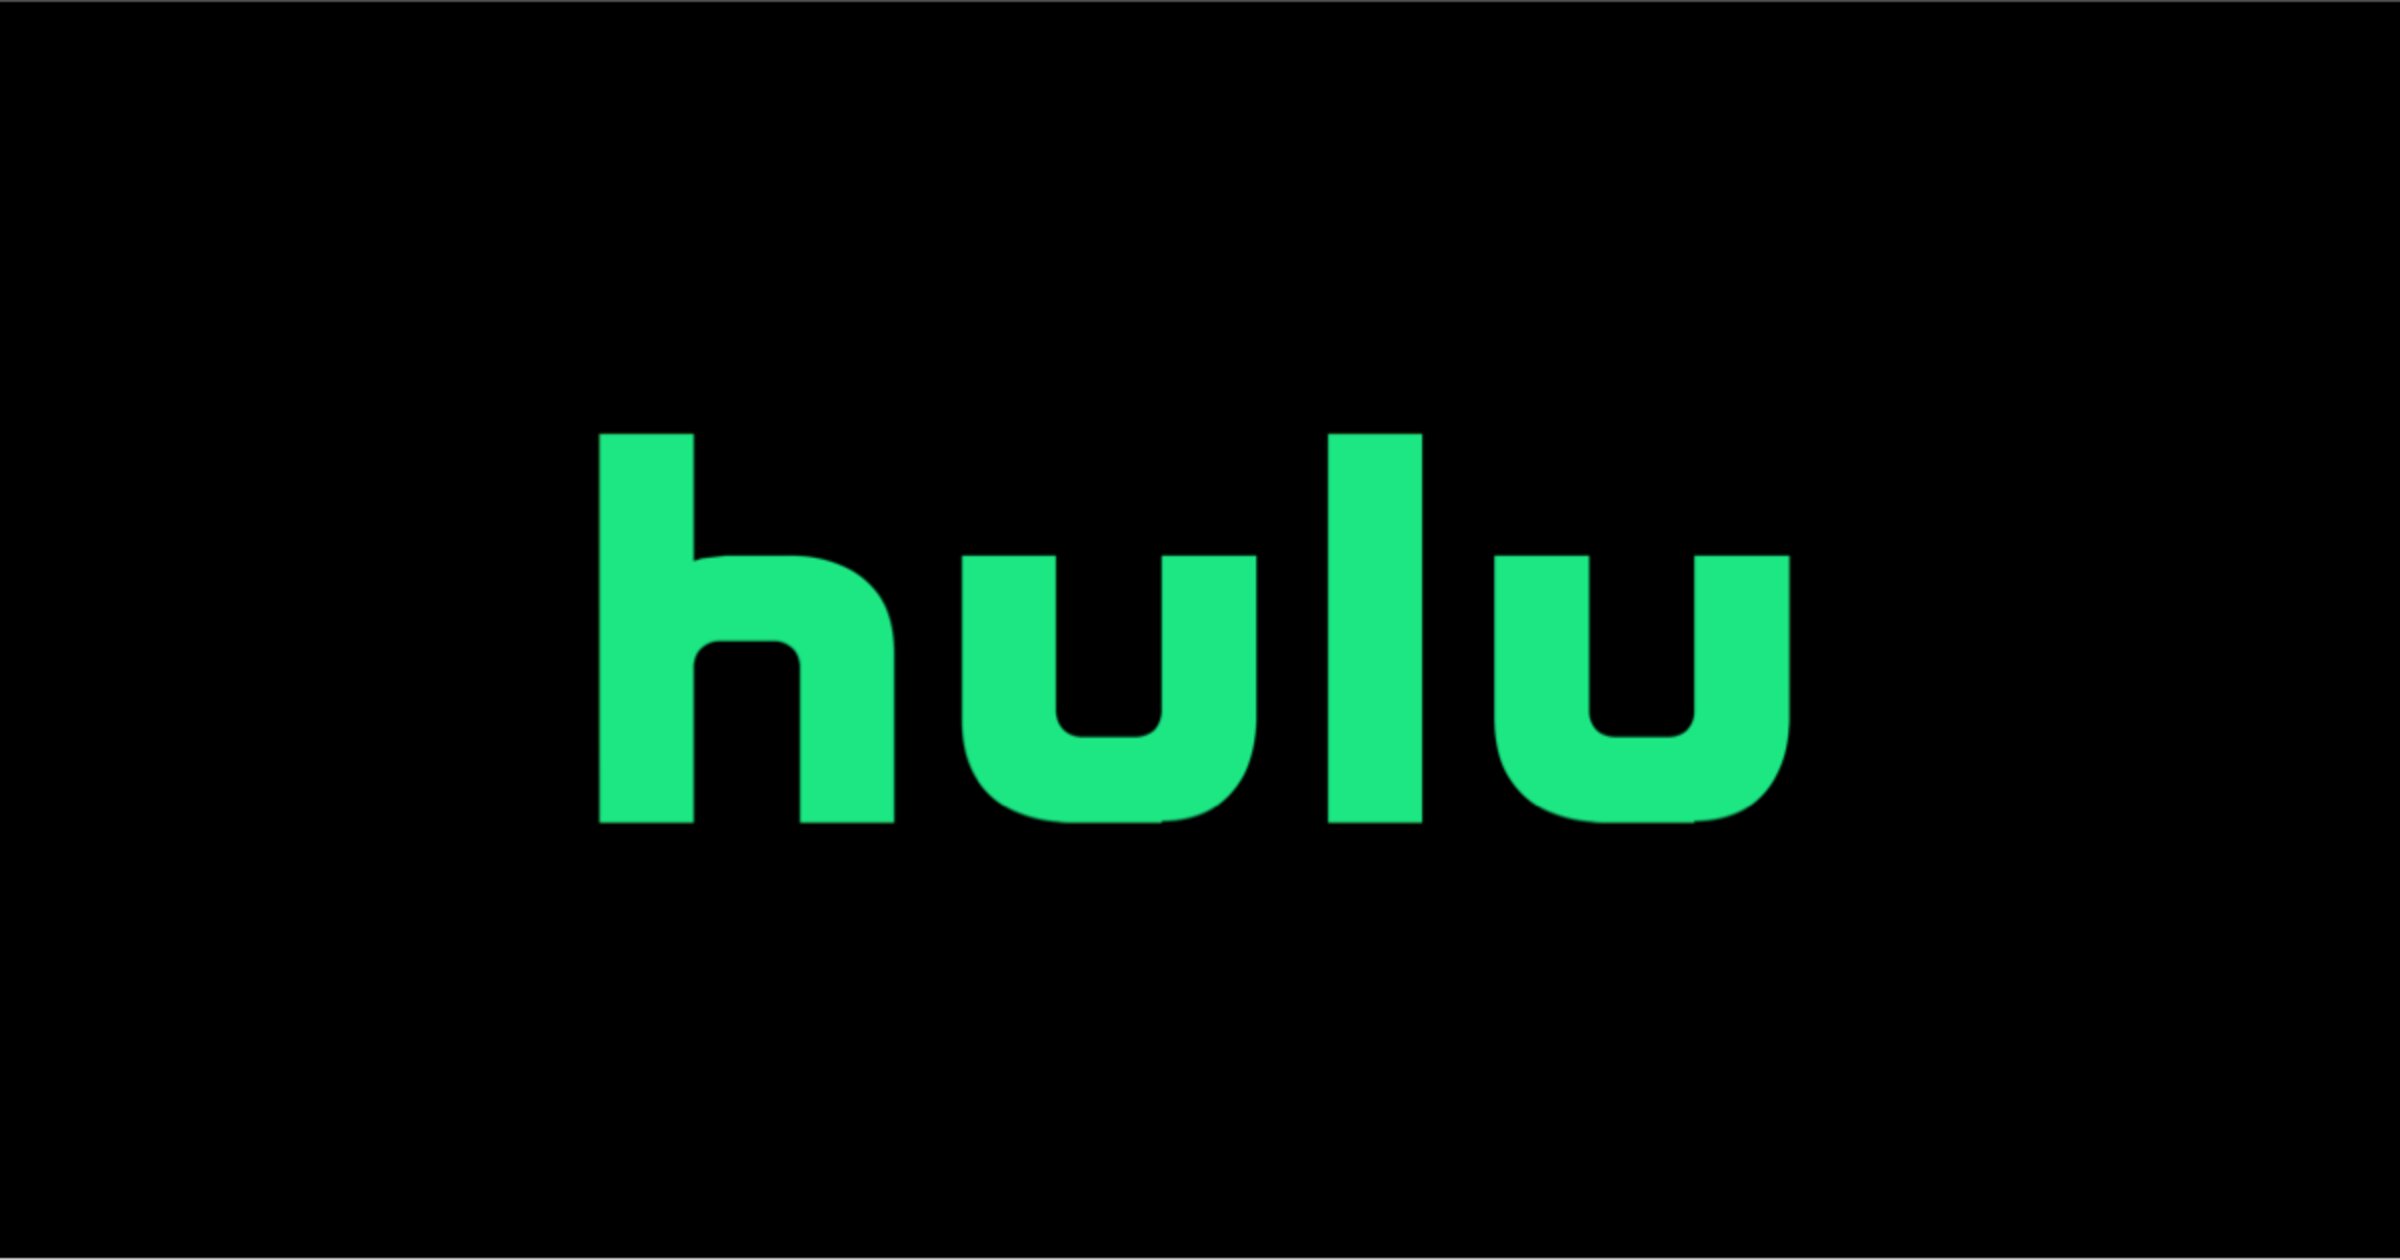 Hunting for the elusive Hulu phone number? Although they've traded the handset for hashtags, find how Hulu's tech-savvy customer service options keep you connected.